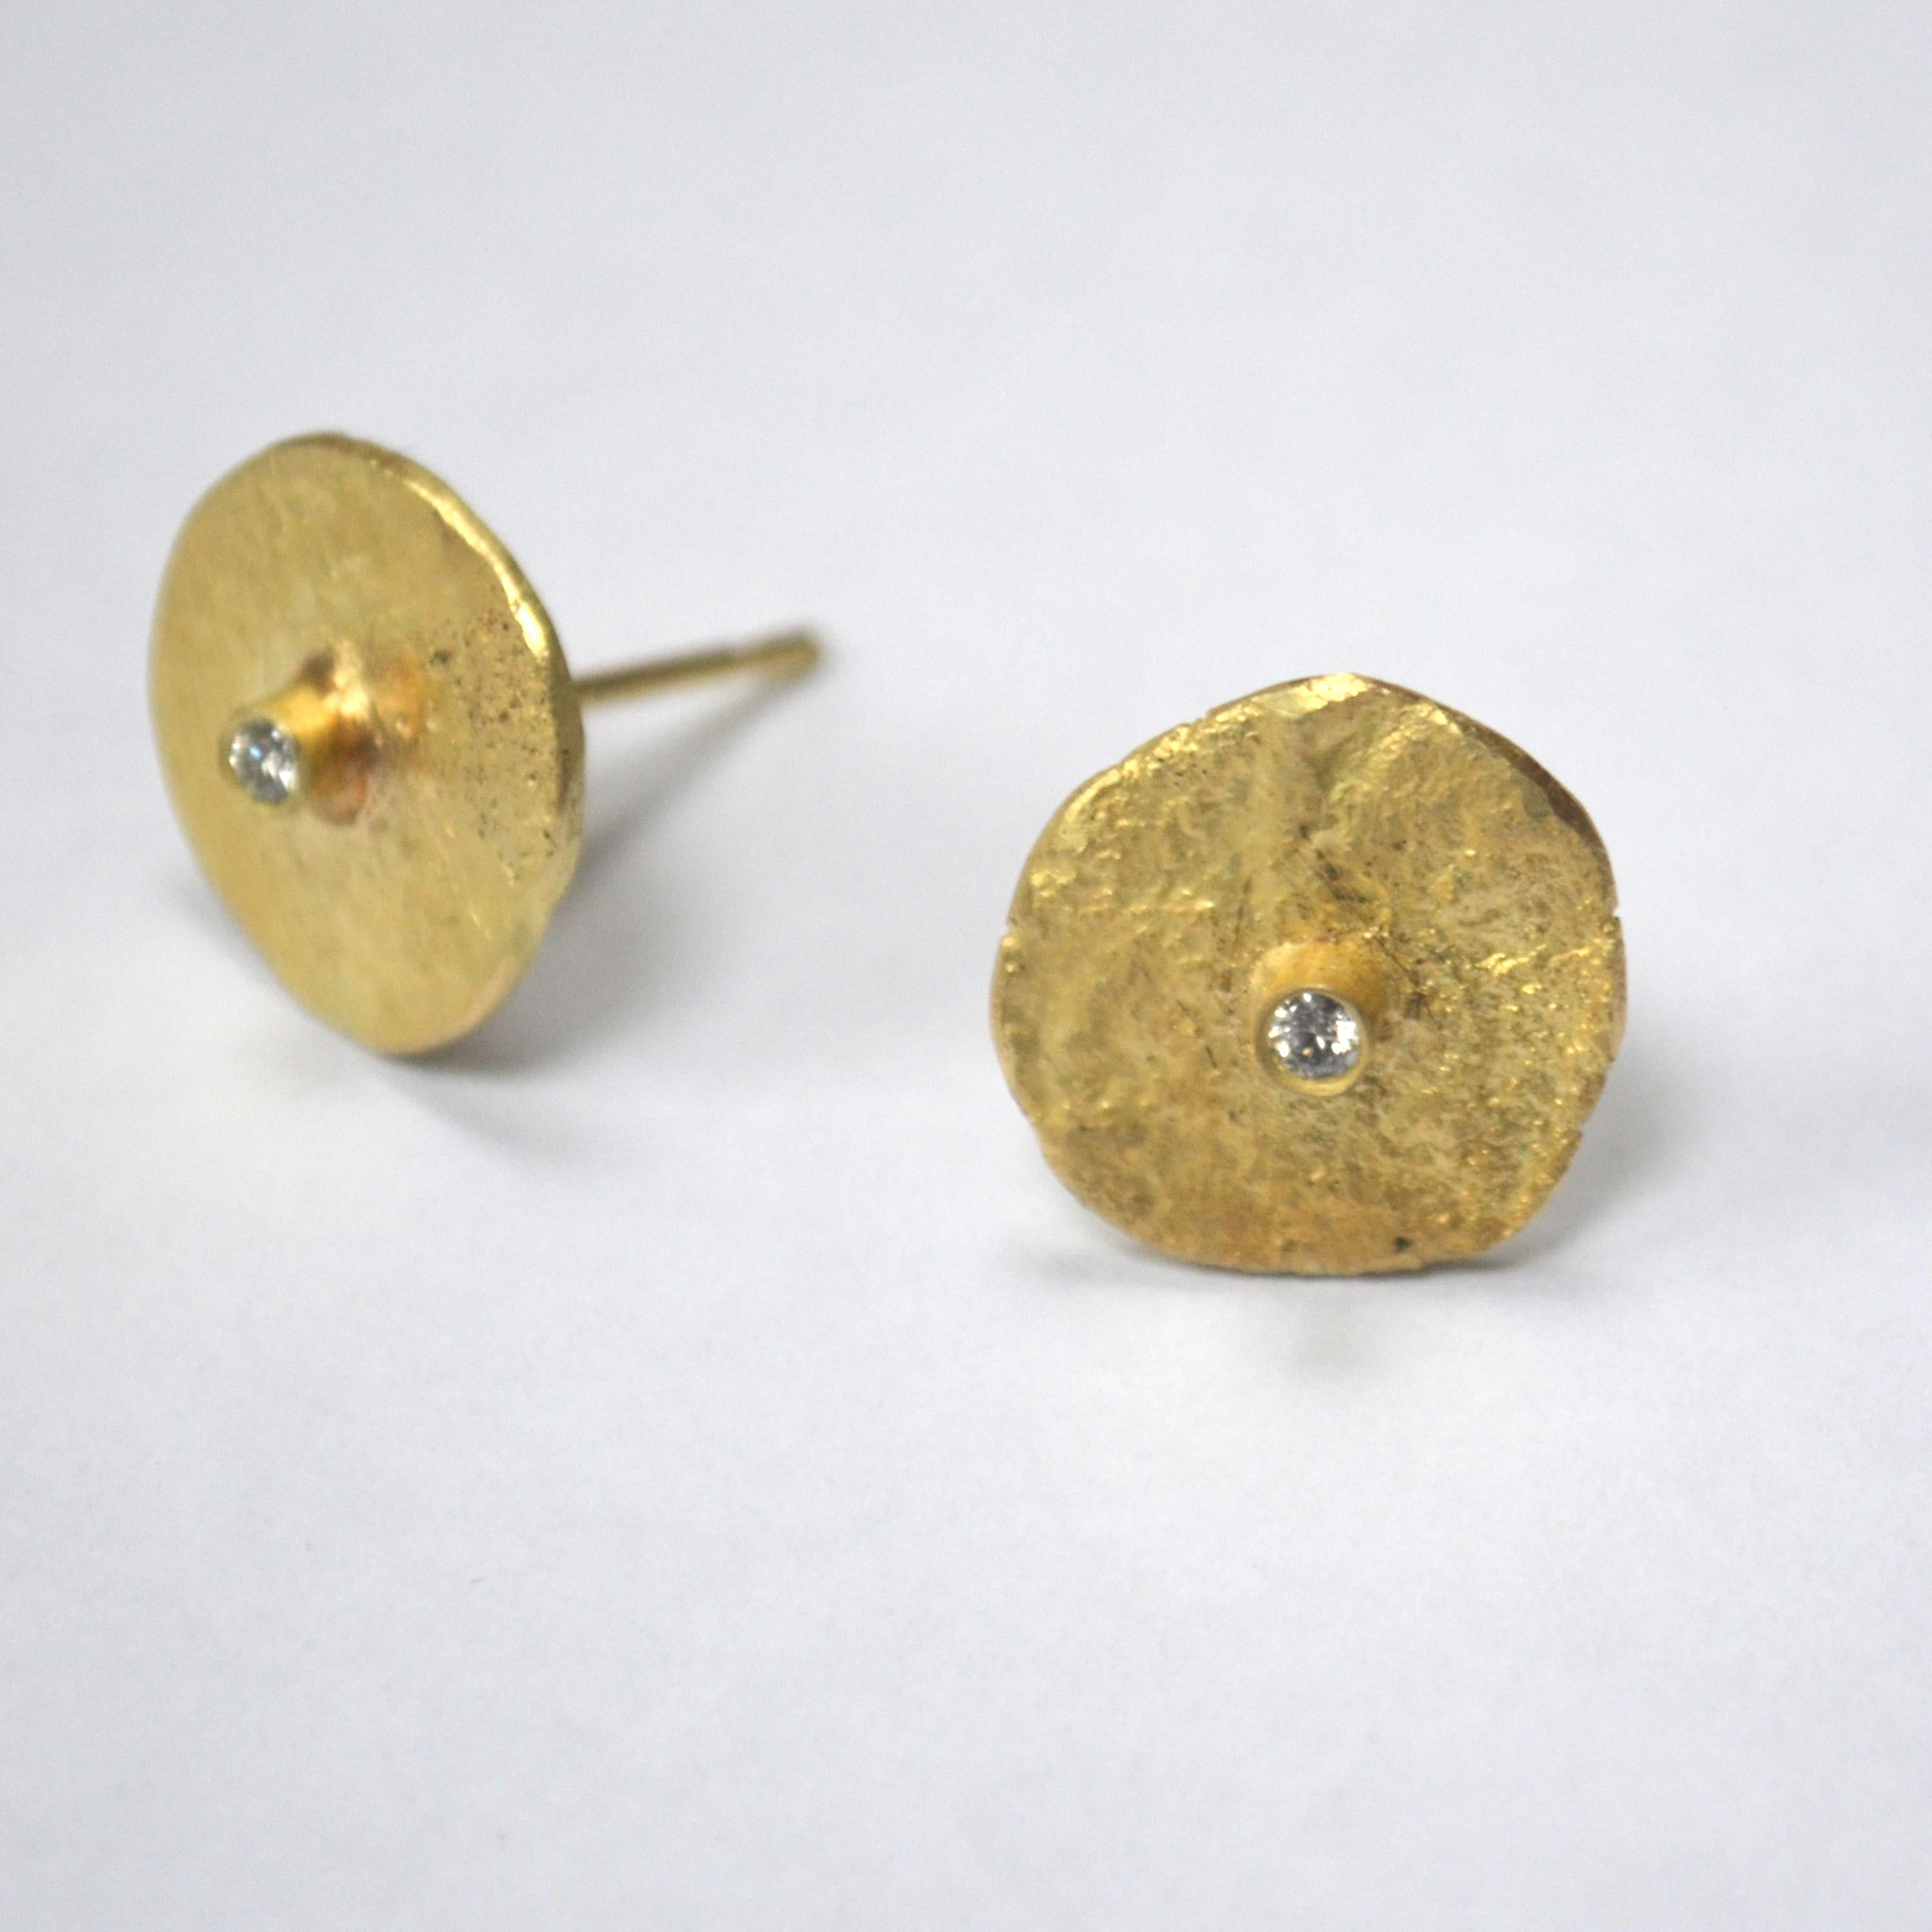 18k yellow gold organic texture disc earrings with two 0.03ct white diamonds.

These handmade organic texture stud earrings are made from 18k yellow gold. Made using Disa Allsopp's signature reticulation techniques to create the uneven, textured